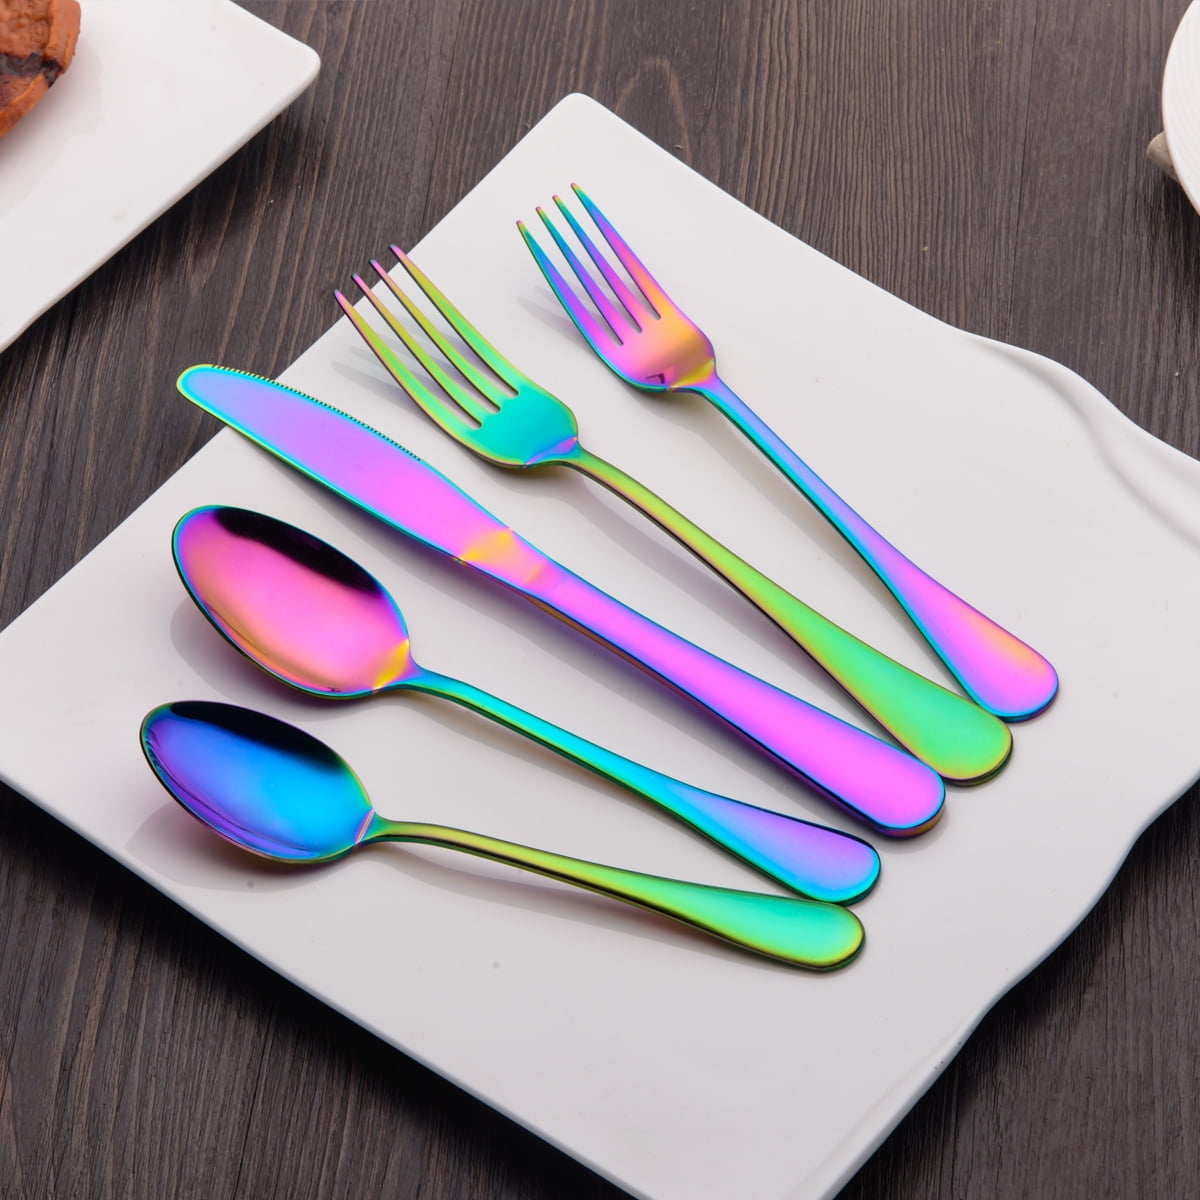 Frcolor Small Spoons Spoon Silverware Little Utensil Sets Silverware Forksspoons Only Metal Stainless Steel Set, Size: 8.15 x 1.69 x 0.2